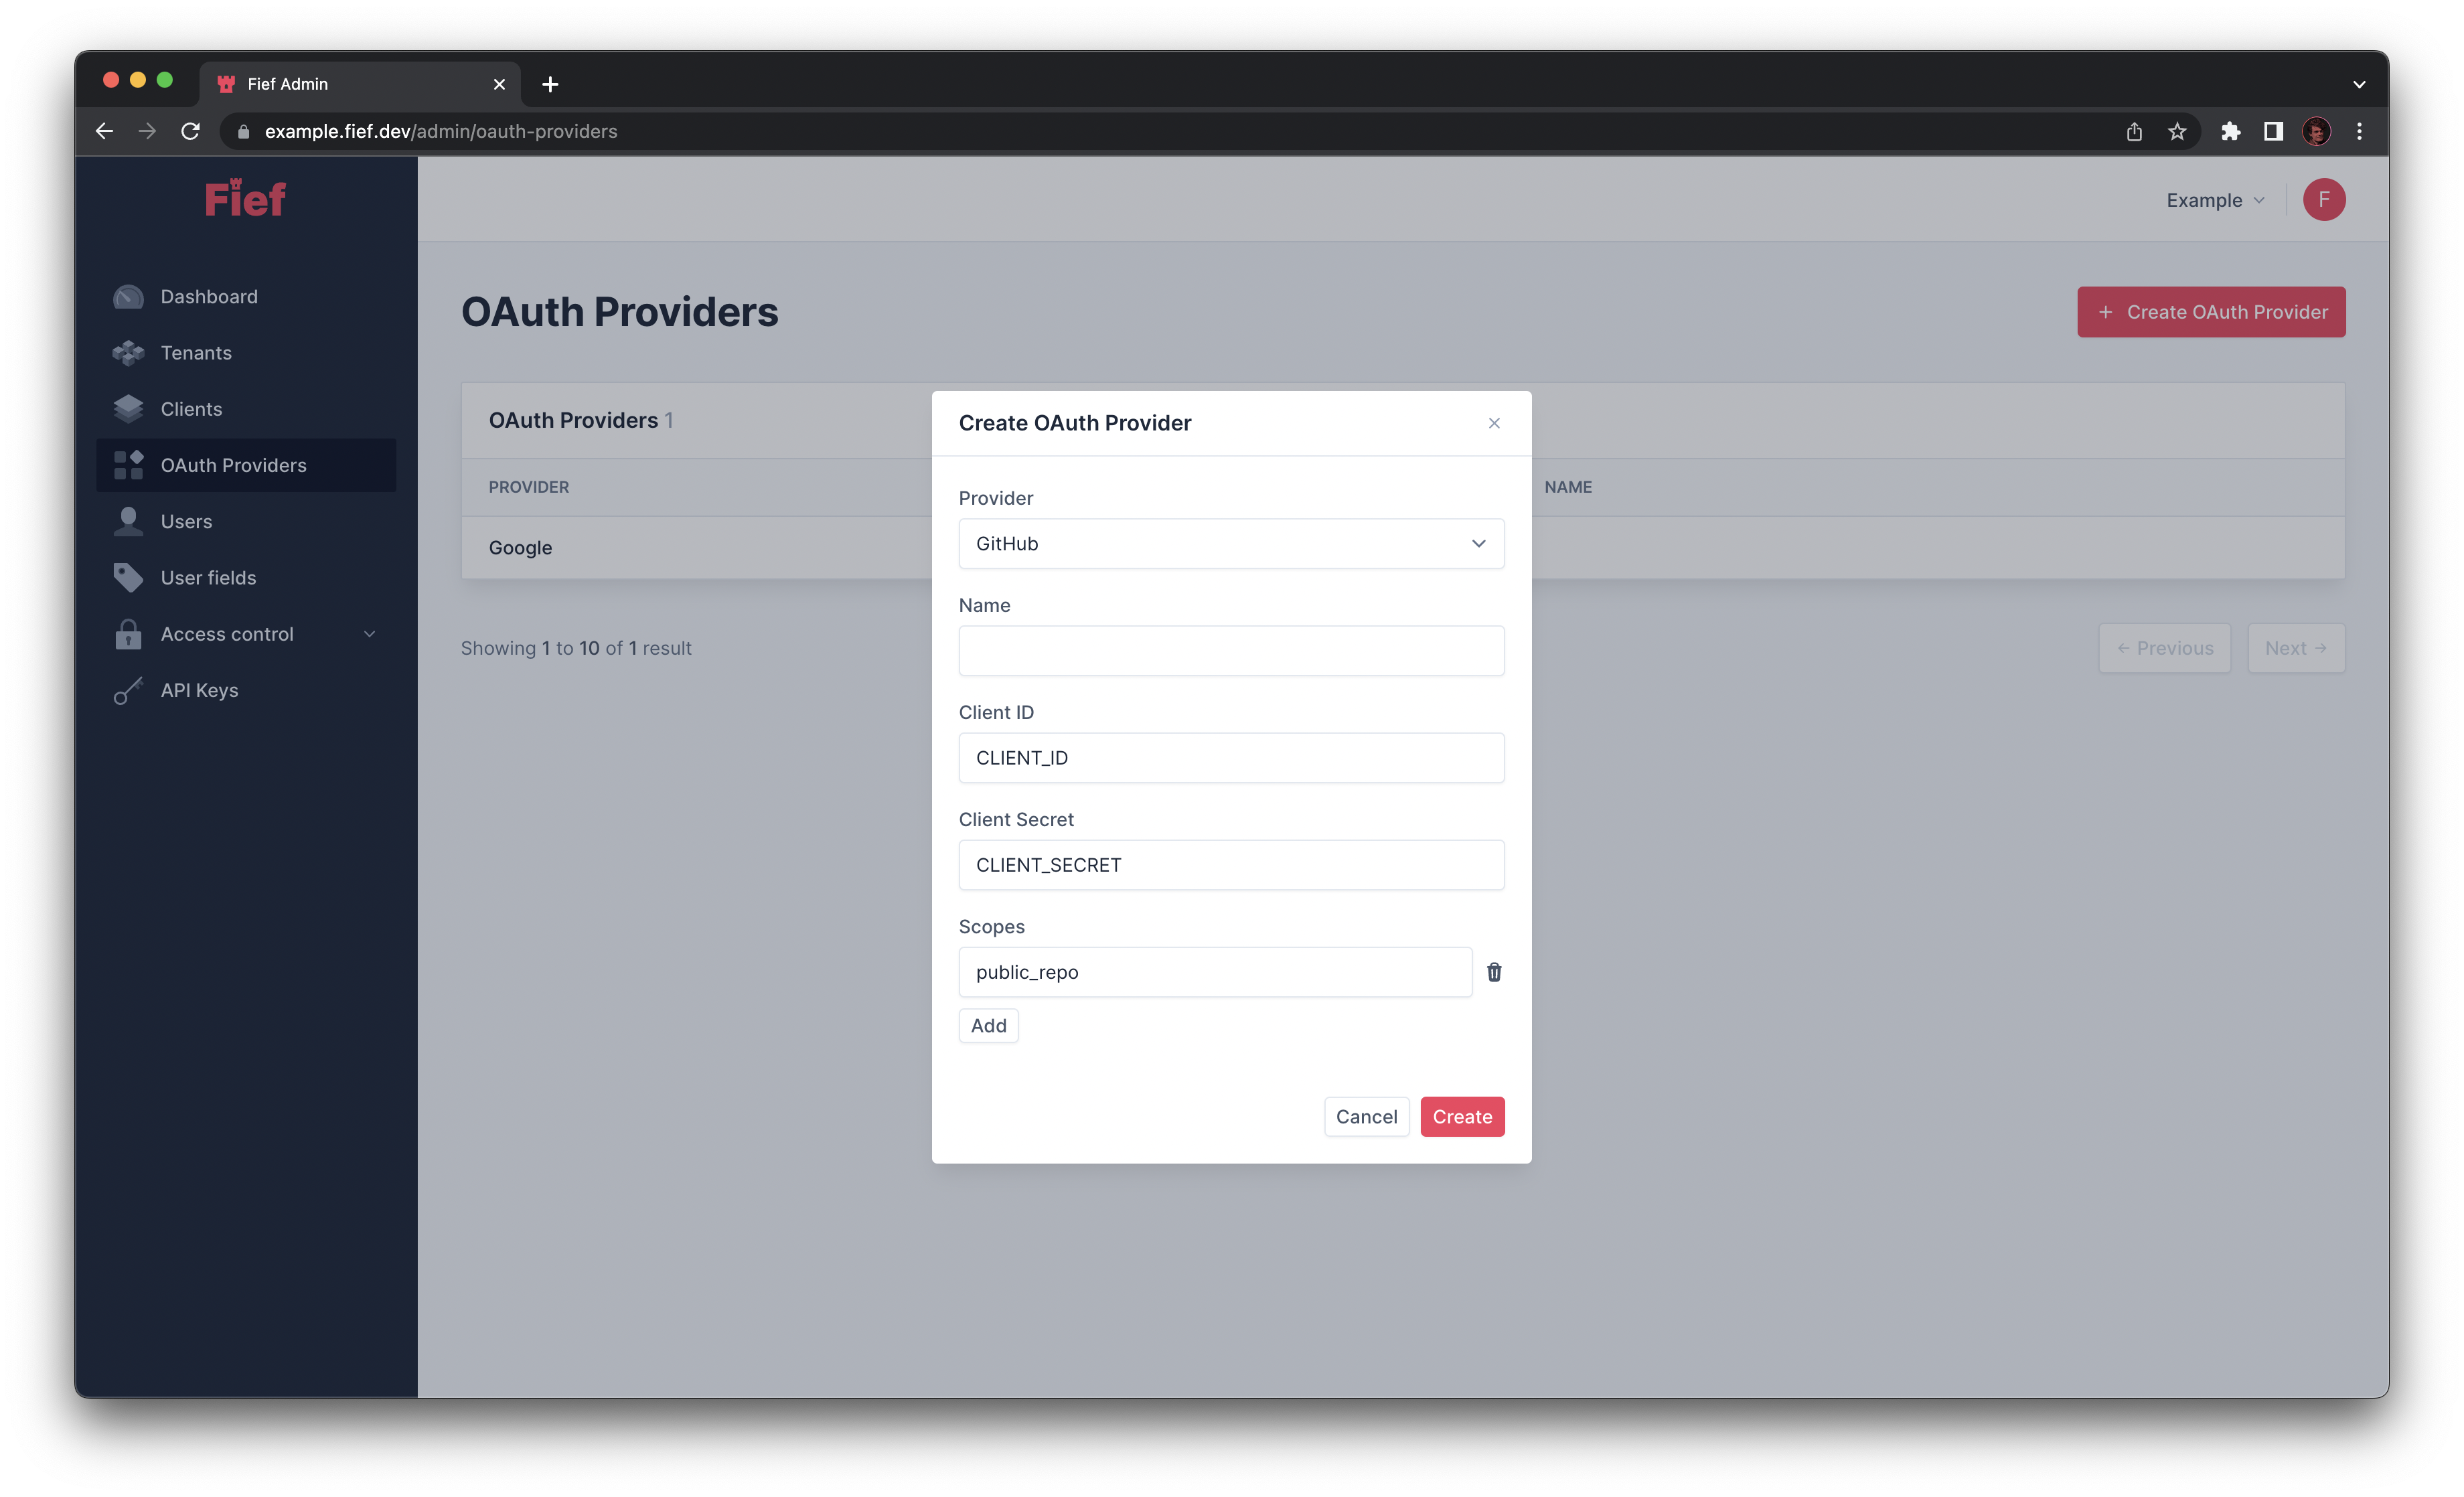 Create OAuth Provider from admin dashboard